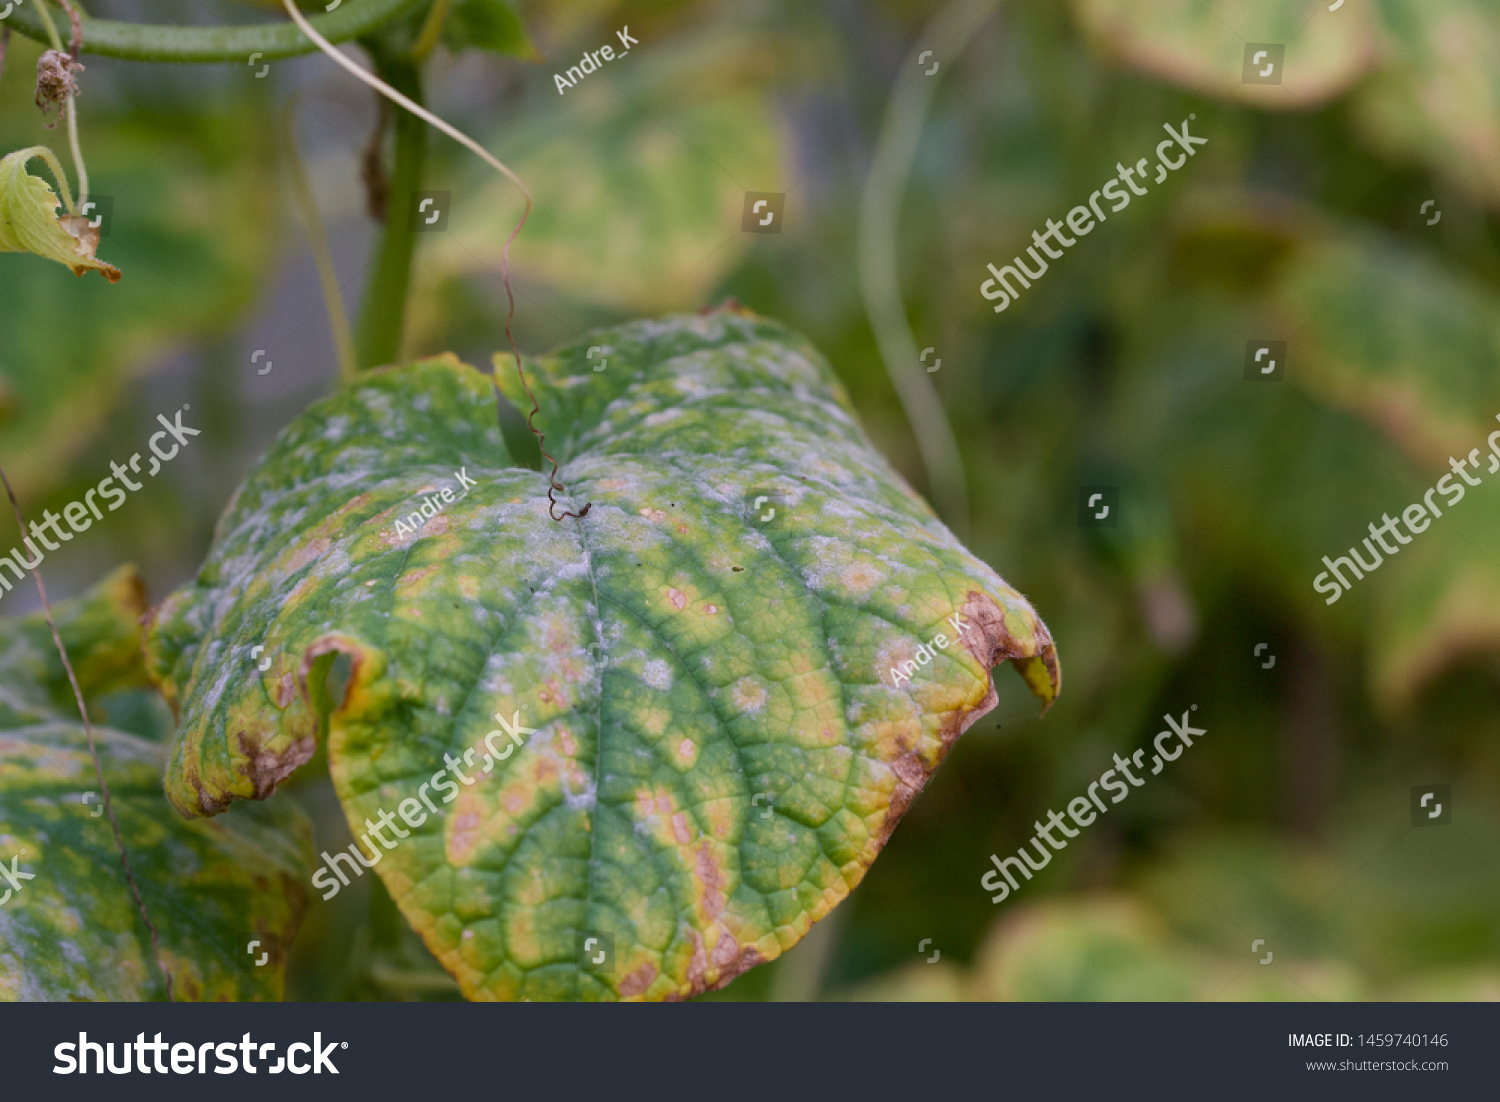 Diseases of cucumbers. Cucumber leaves affected by the disease. Selective focus. #1459740146